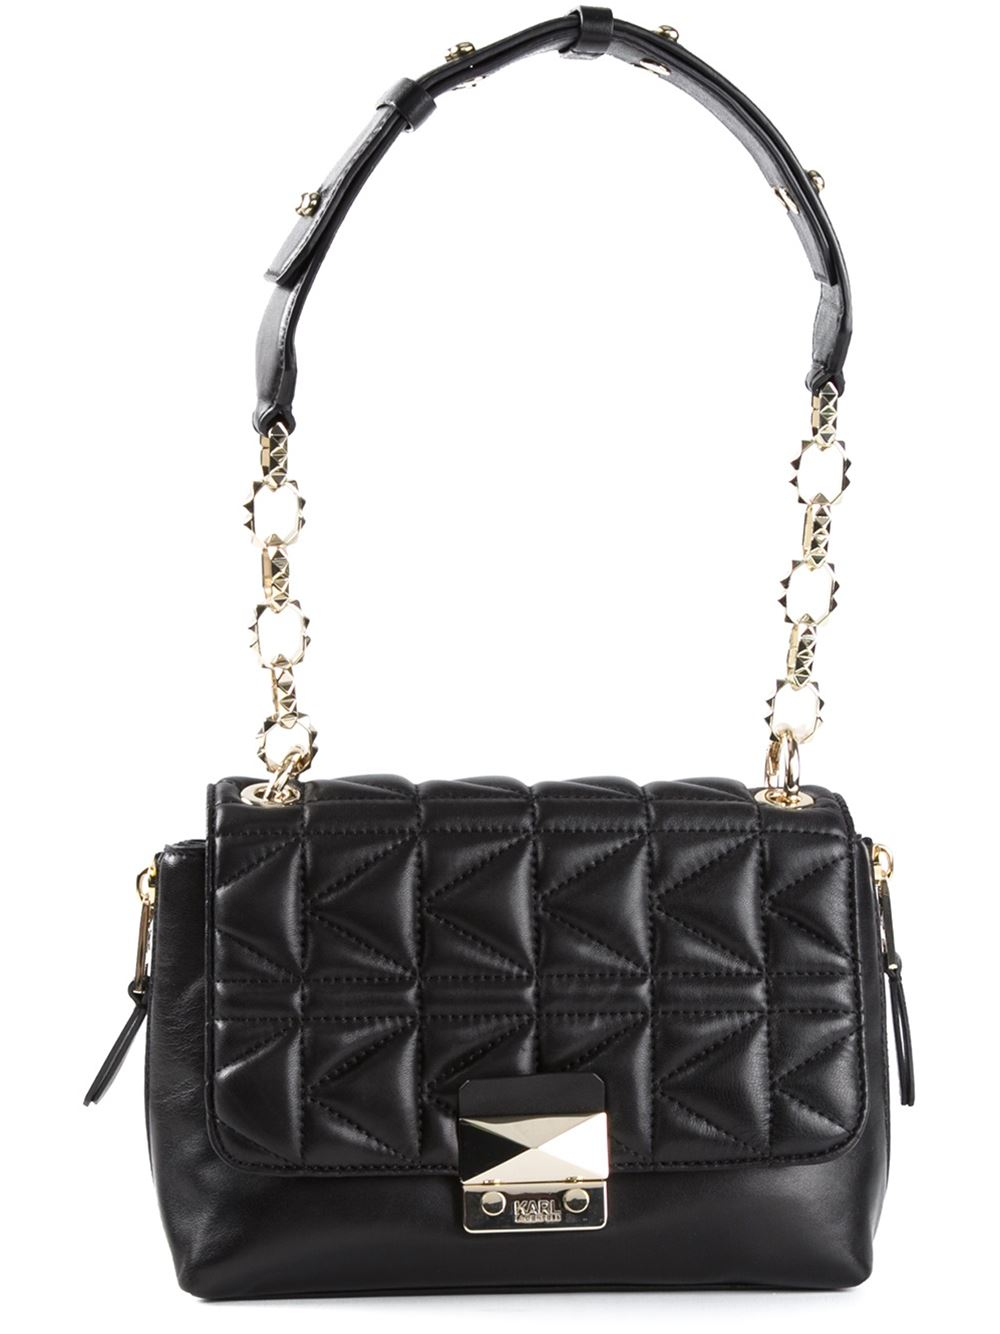 Karl Lagerfeld Small Quilted Shoulder Bag in Black | Lyst